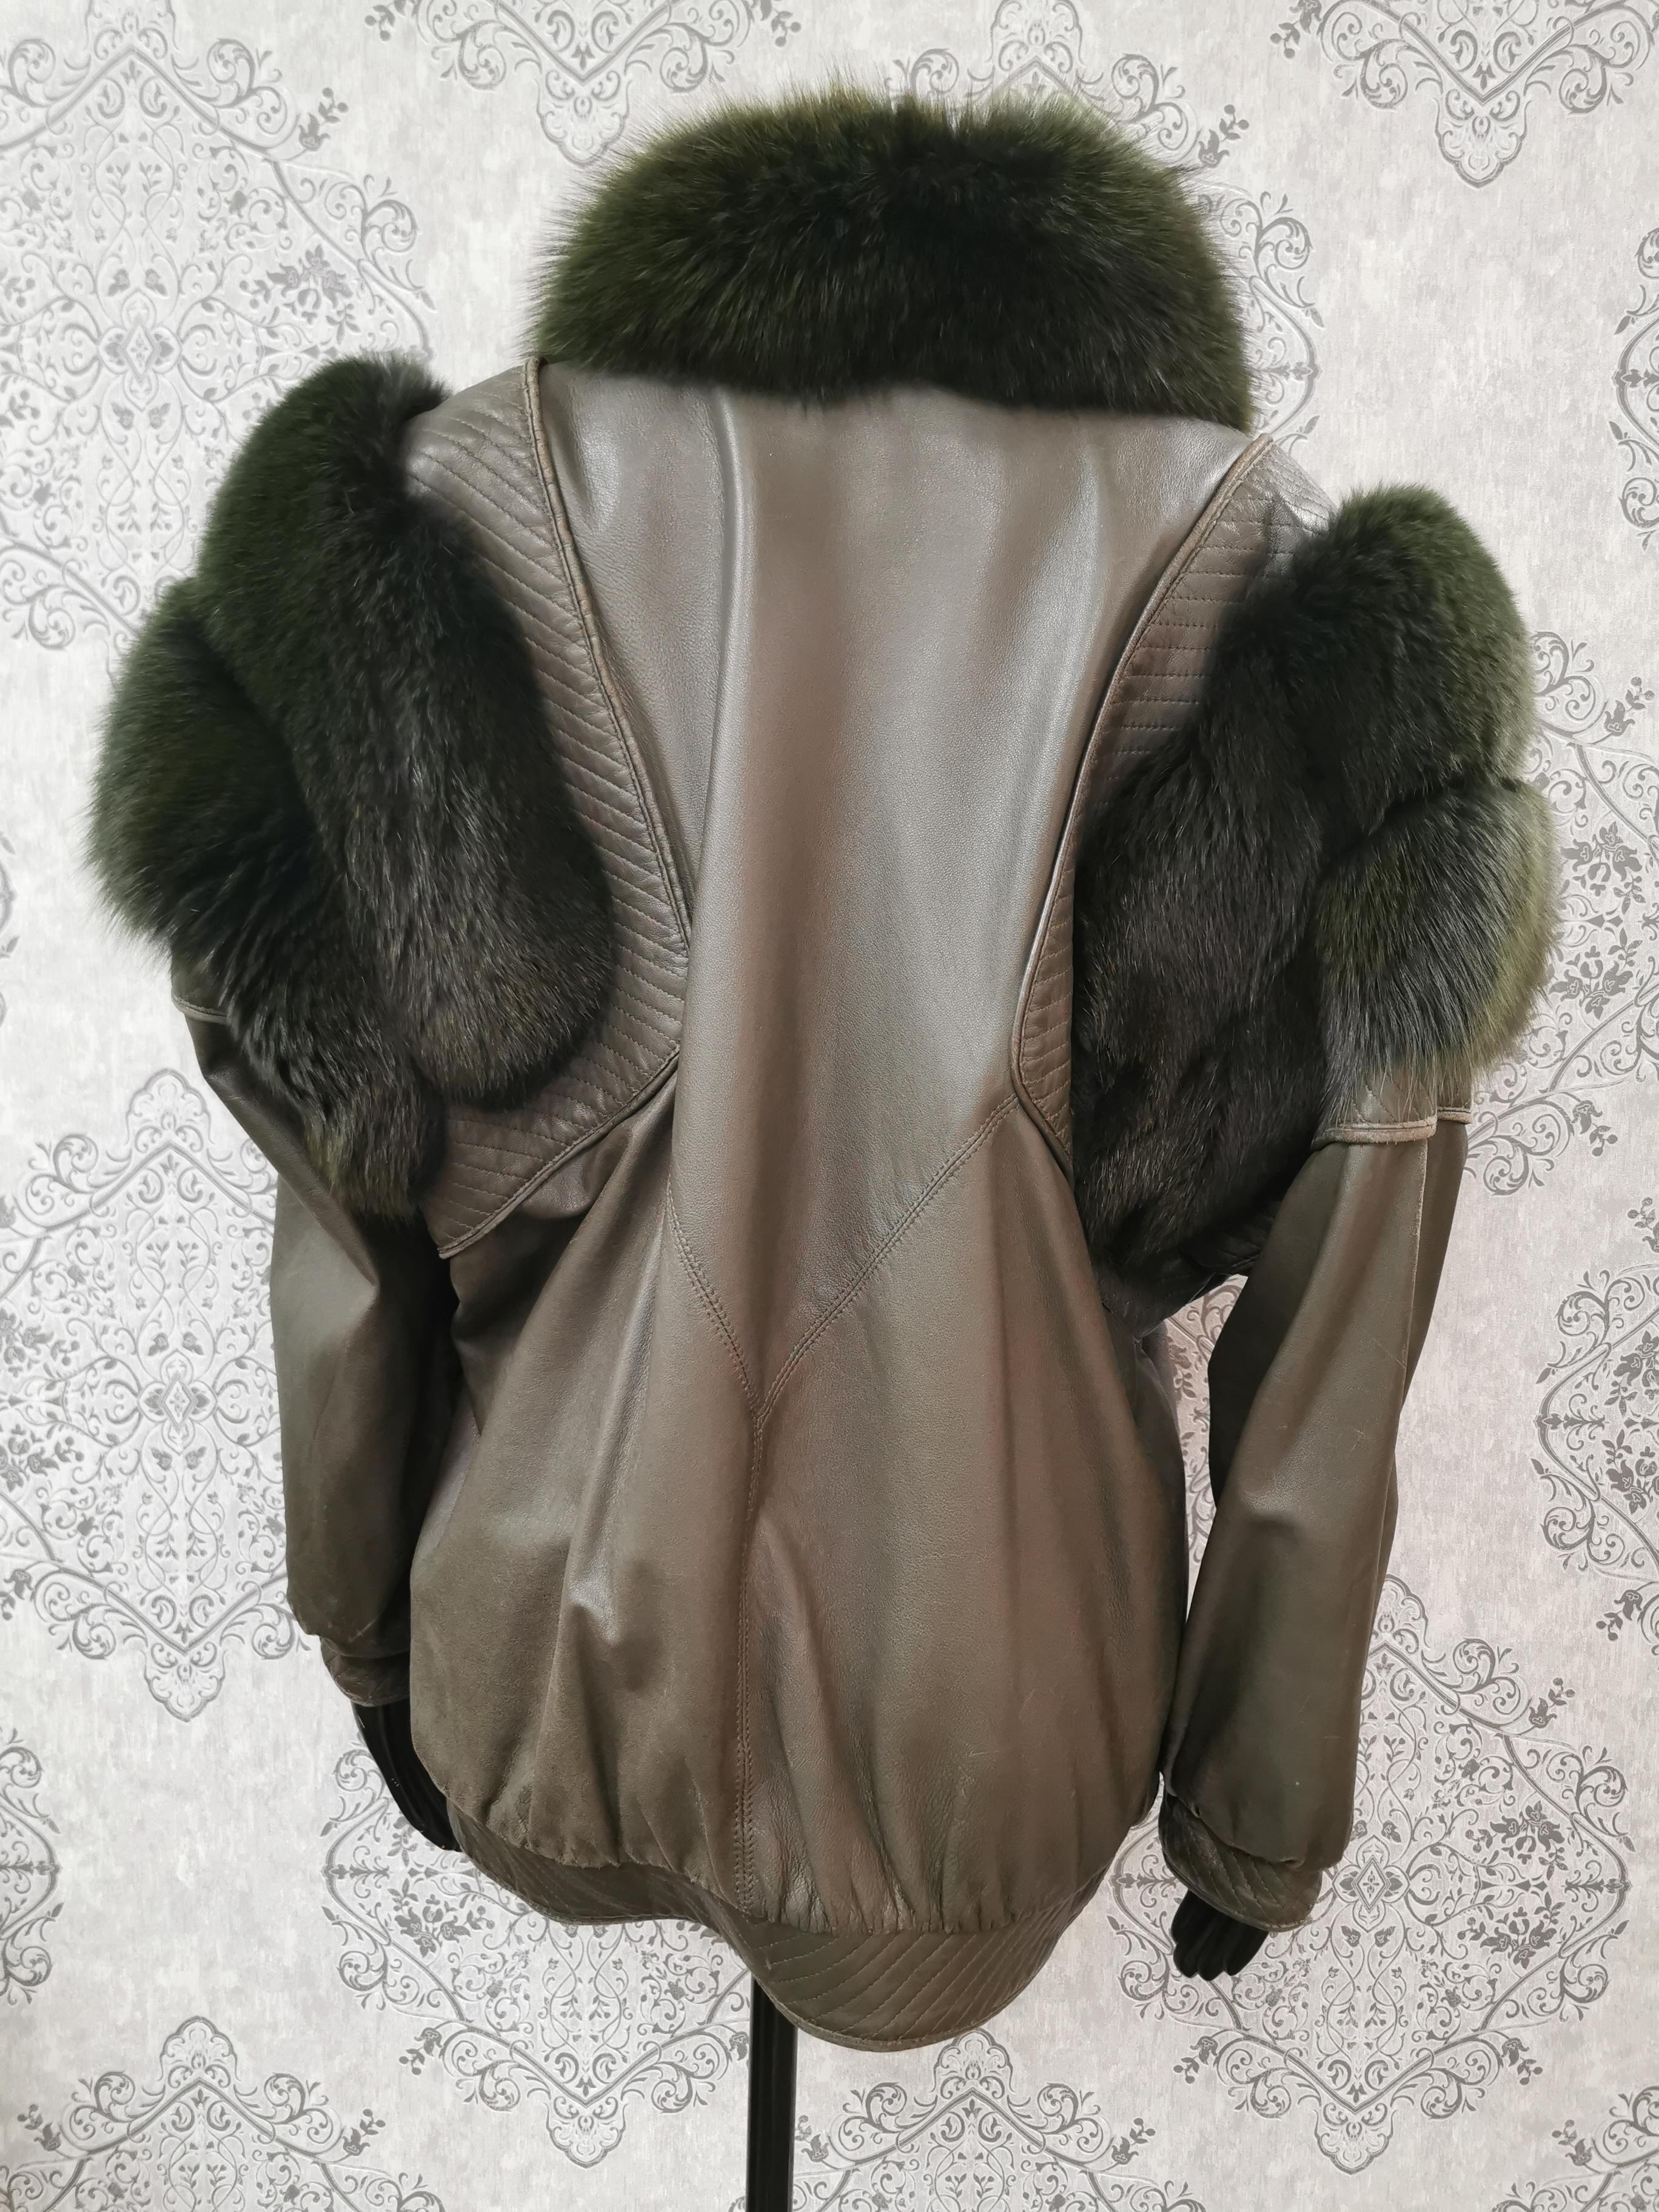 Saga fox leather coat with dyed shadow fox fur trim and sleeves size 12 In Excellent Condition For Sale In Montreal, Quebec